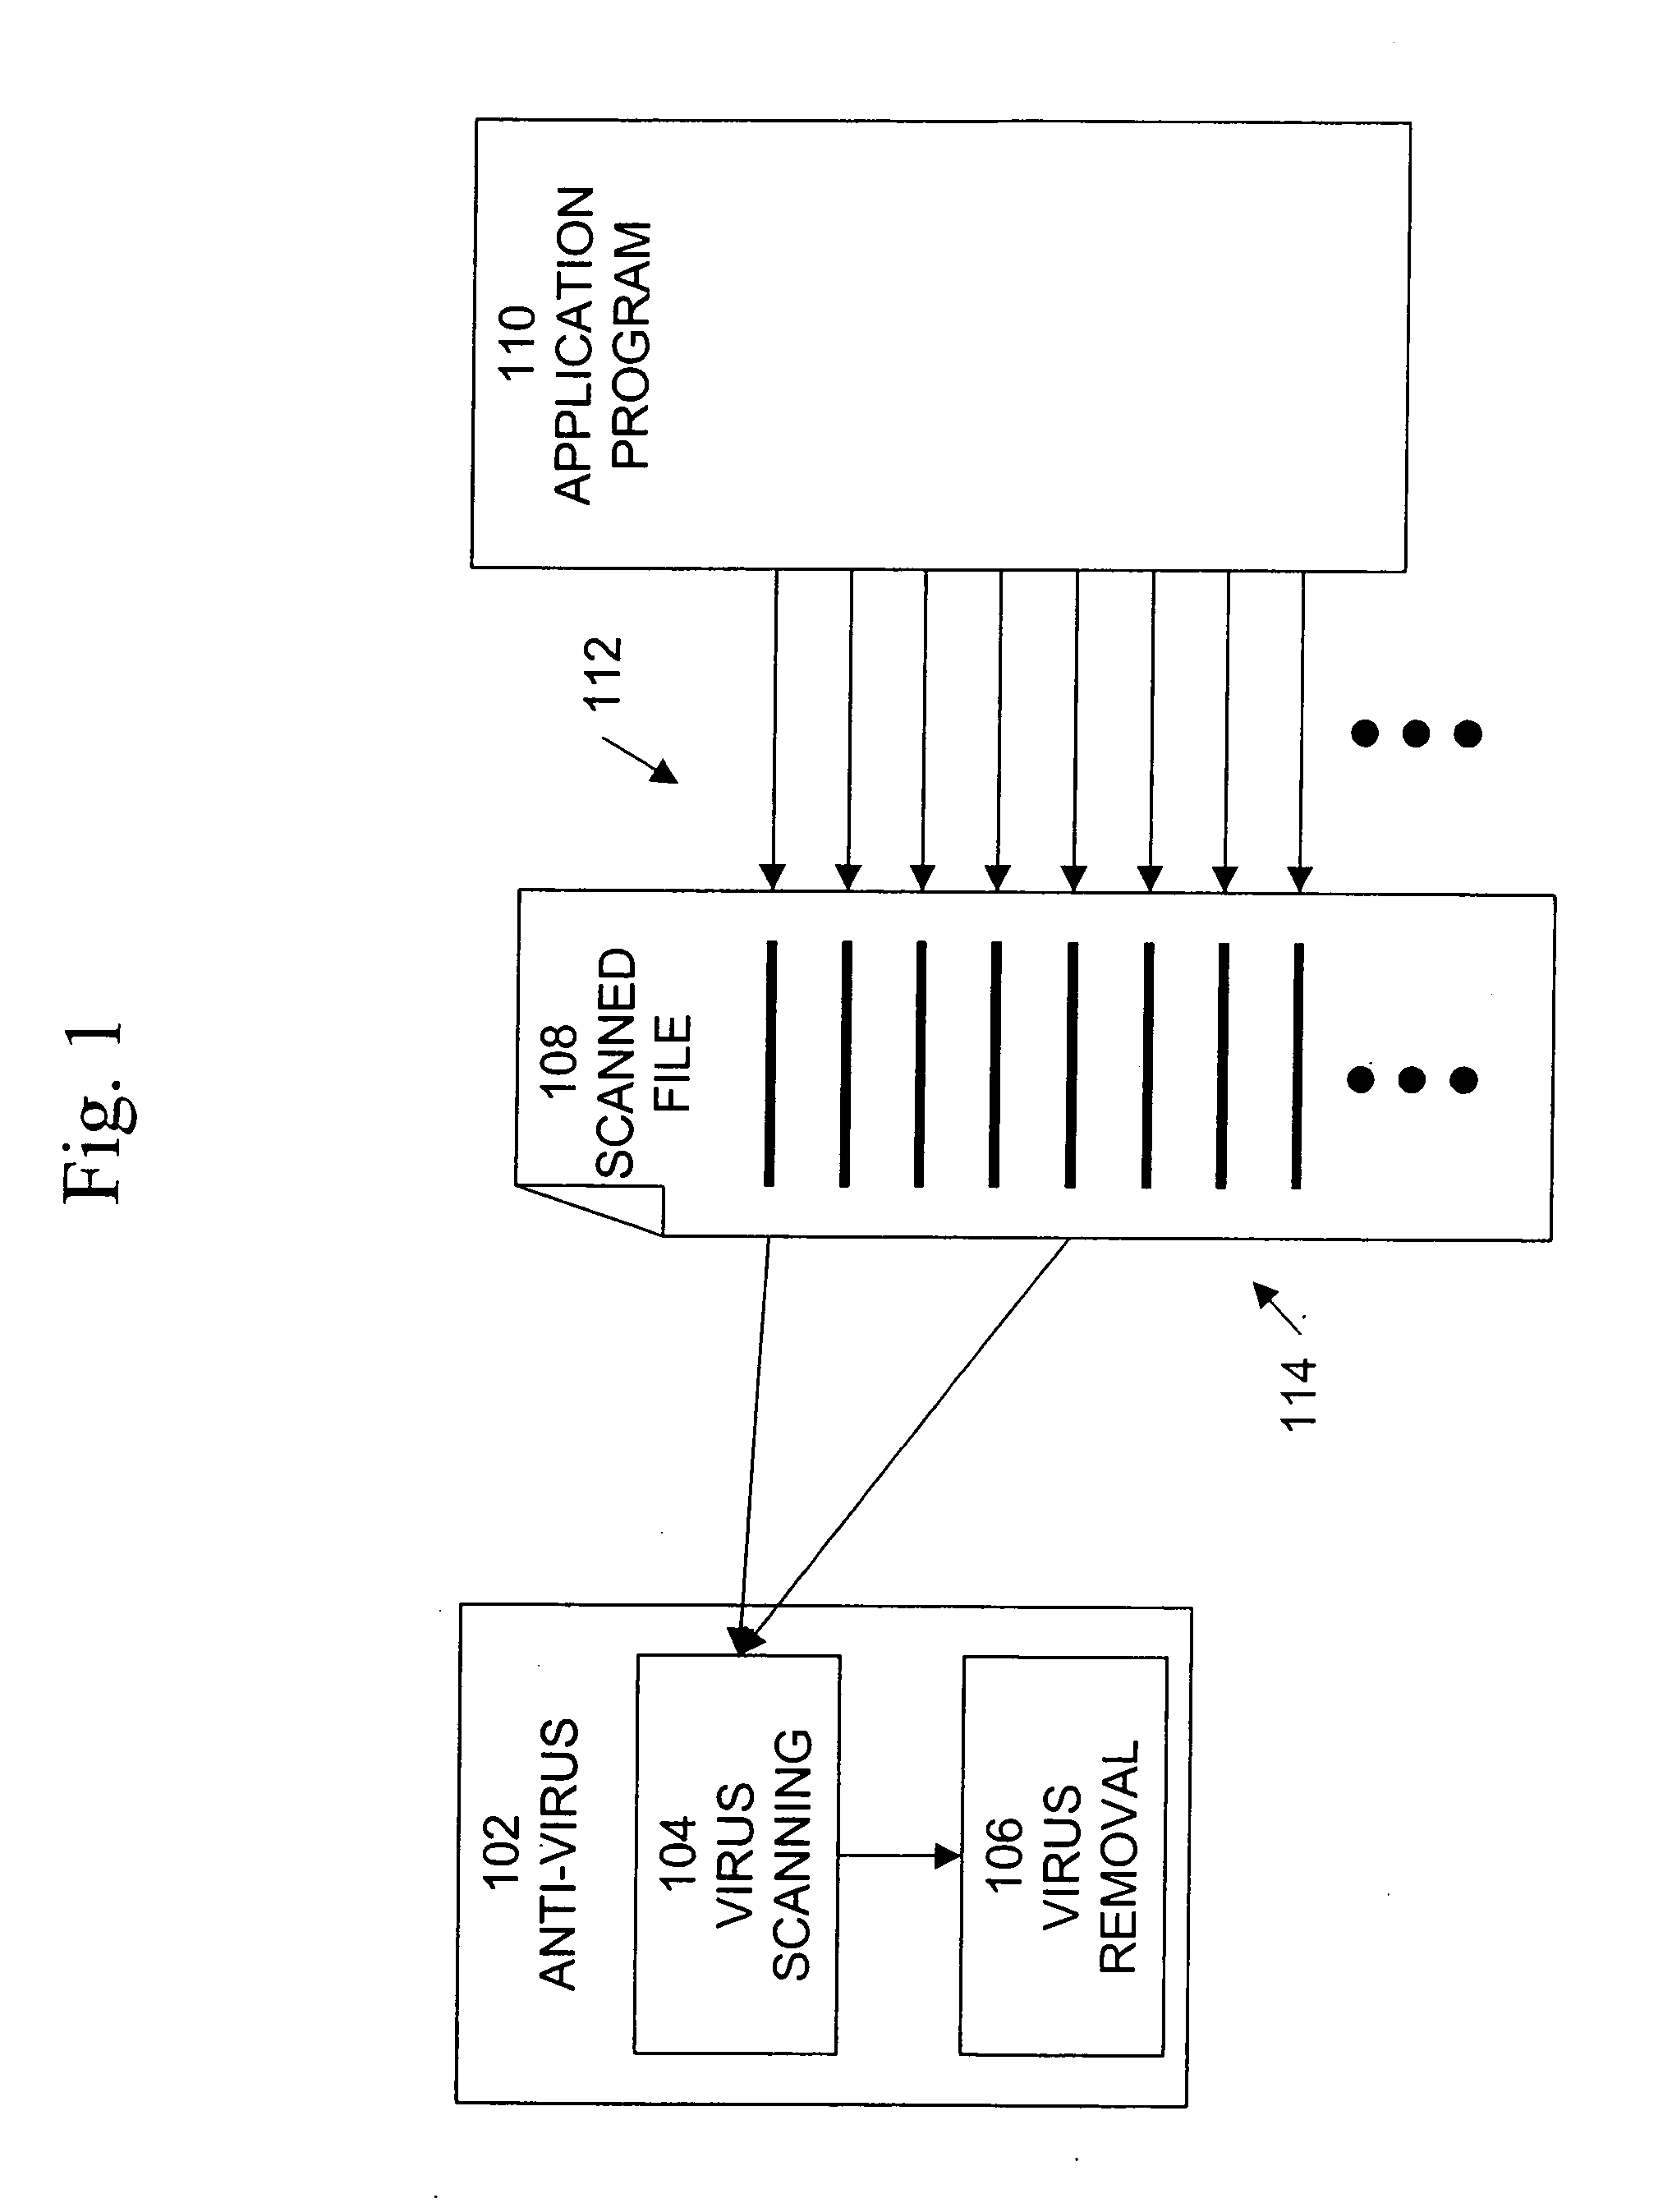 Method and system for delayed write scanning for detecting computer malwares